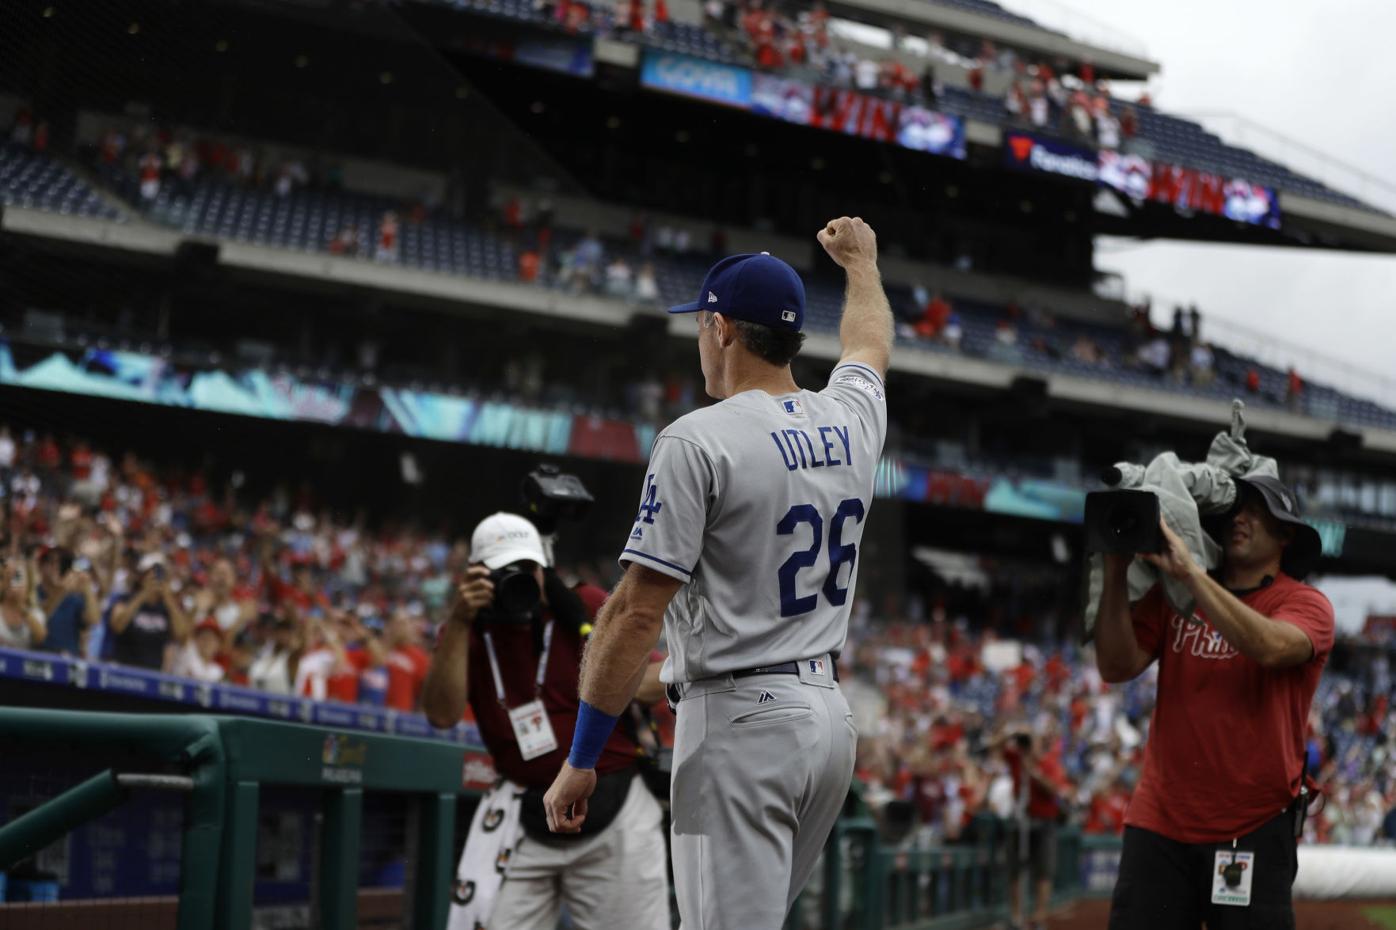 Bye forever: Chase Utley gives Philly fans final, emotional